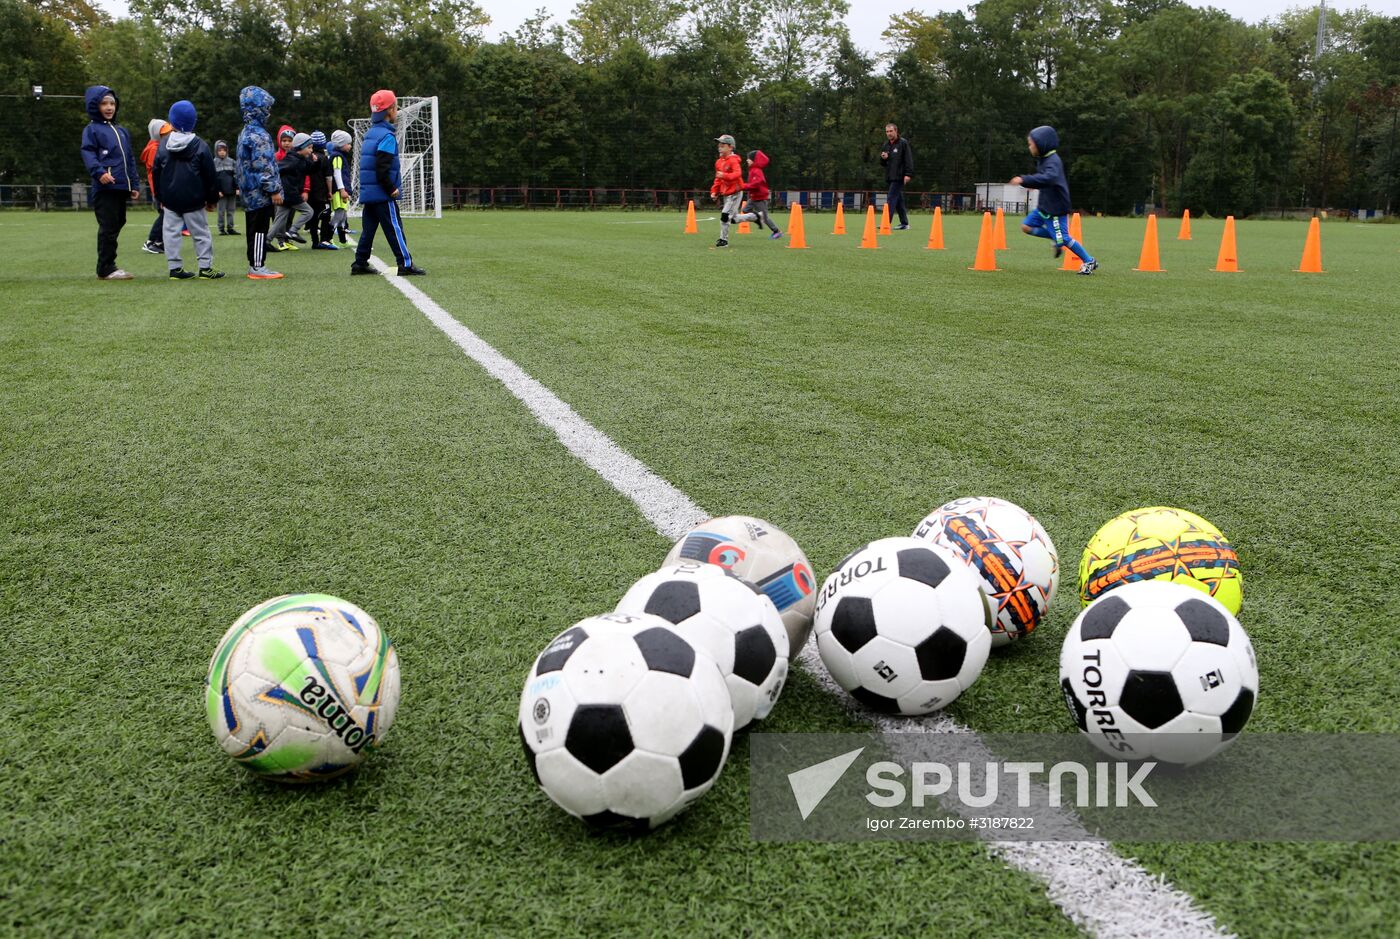 Training site for World Cup 2018 participating teams in Kaliningrad